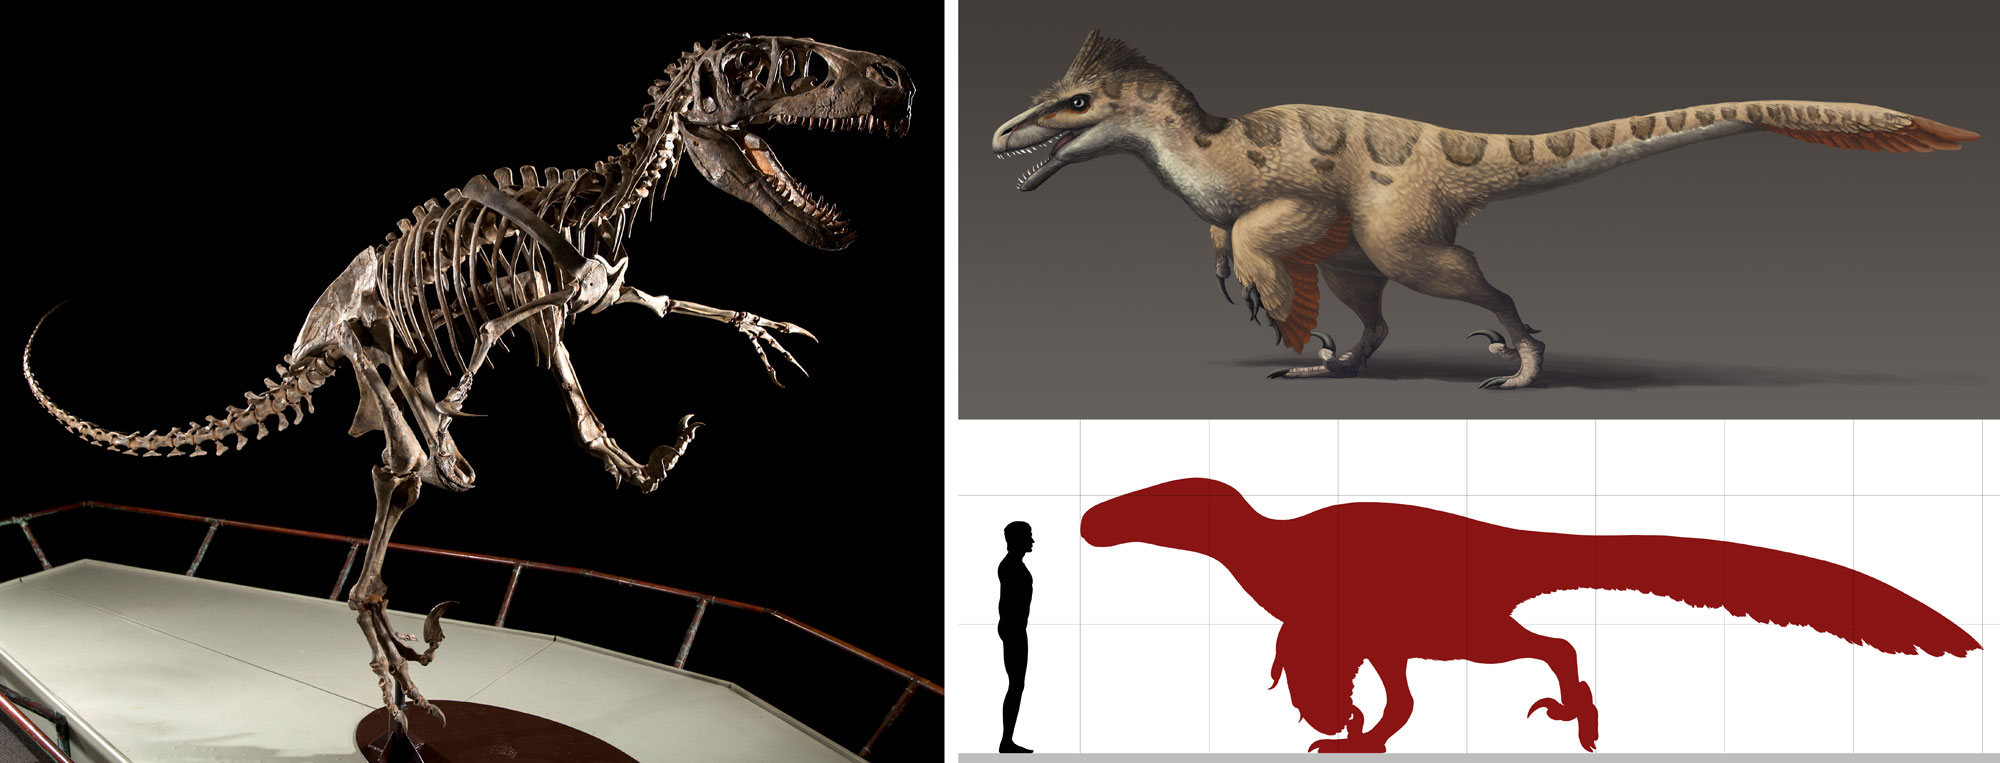 2-Panel image of Utahraptor, a predatory dinosaur from the Early Cretaceous of Utah. Panel 1: Photo of a reconstructed skeleton on display in a museum showing rear feet, each with a large retracted claw on the inner toe. Panel 2: Illustration of the animal during life. It is covered with feathers, has a long tail, and forearms that long like short wings. The head has a mount with pointed teeth. Panel 3: Drawing showing the silhouettes of Utahraptor and an adult man. Utahraptor is slightly taller than the person.